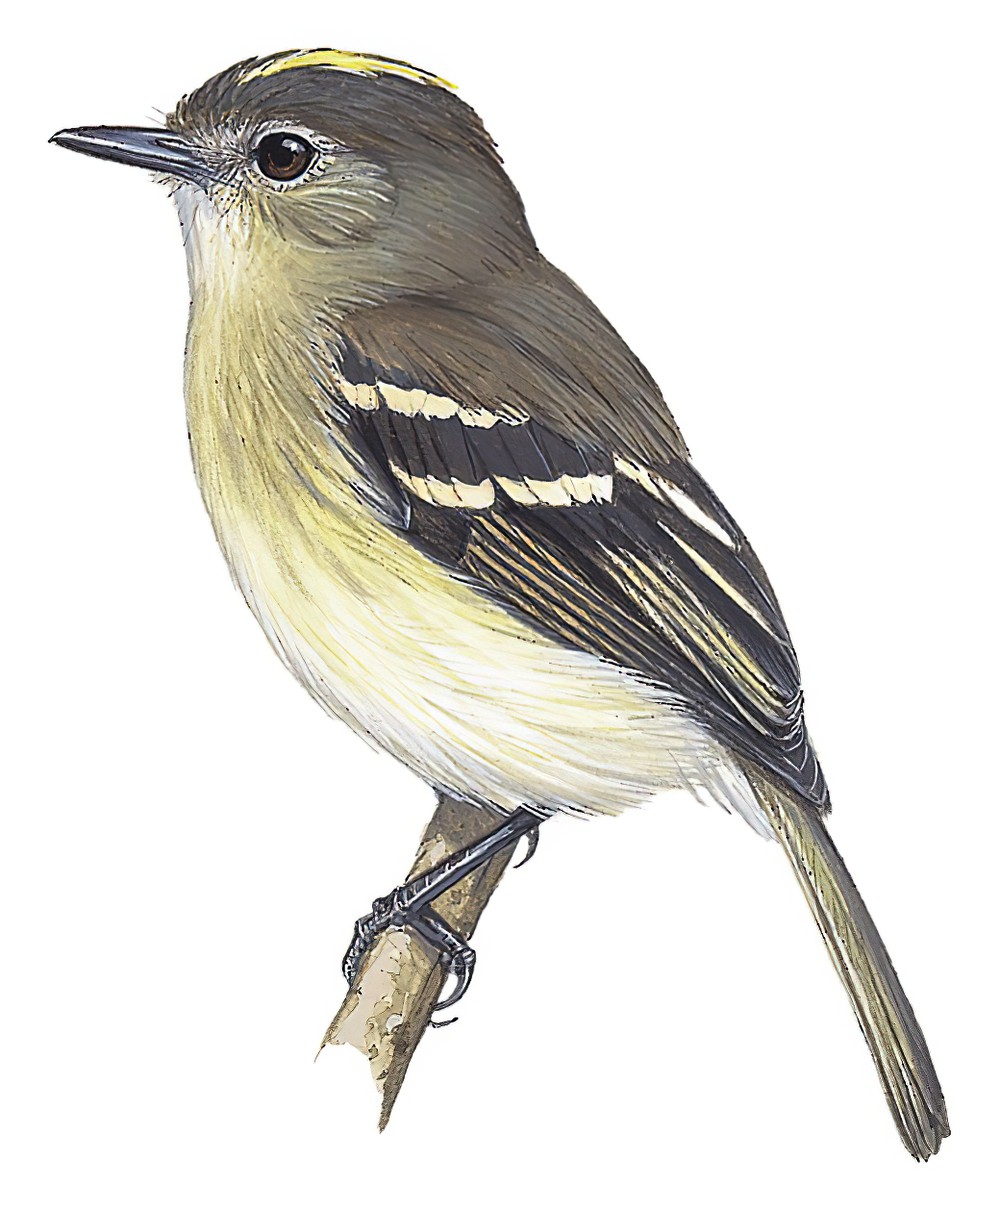 Olive-chested Flycatcher / Myiophobus cryptoxanthus